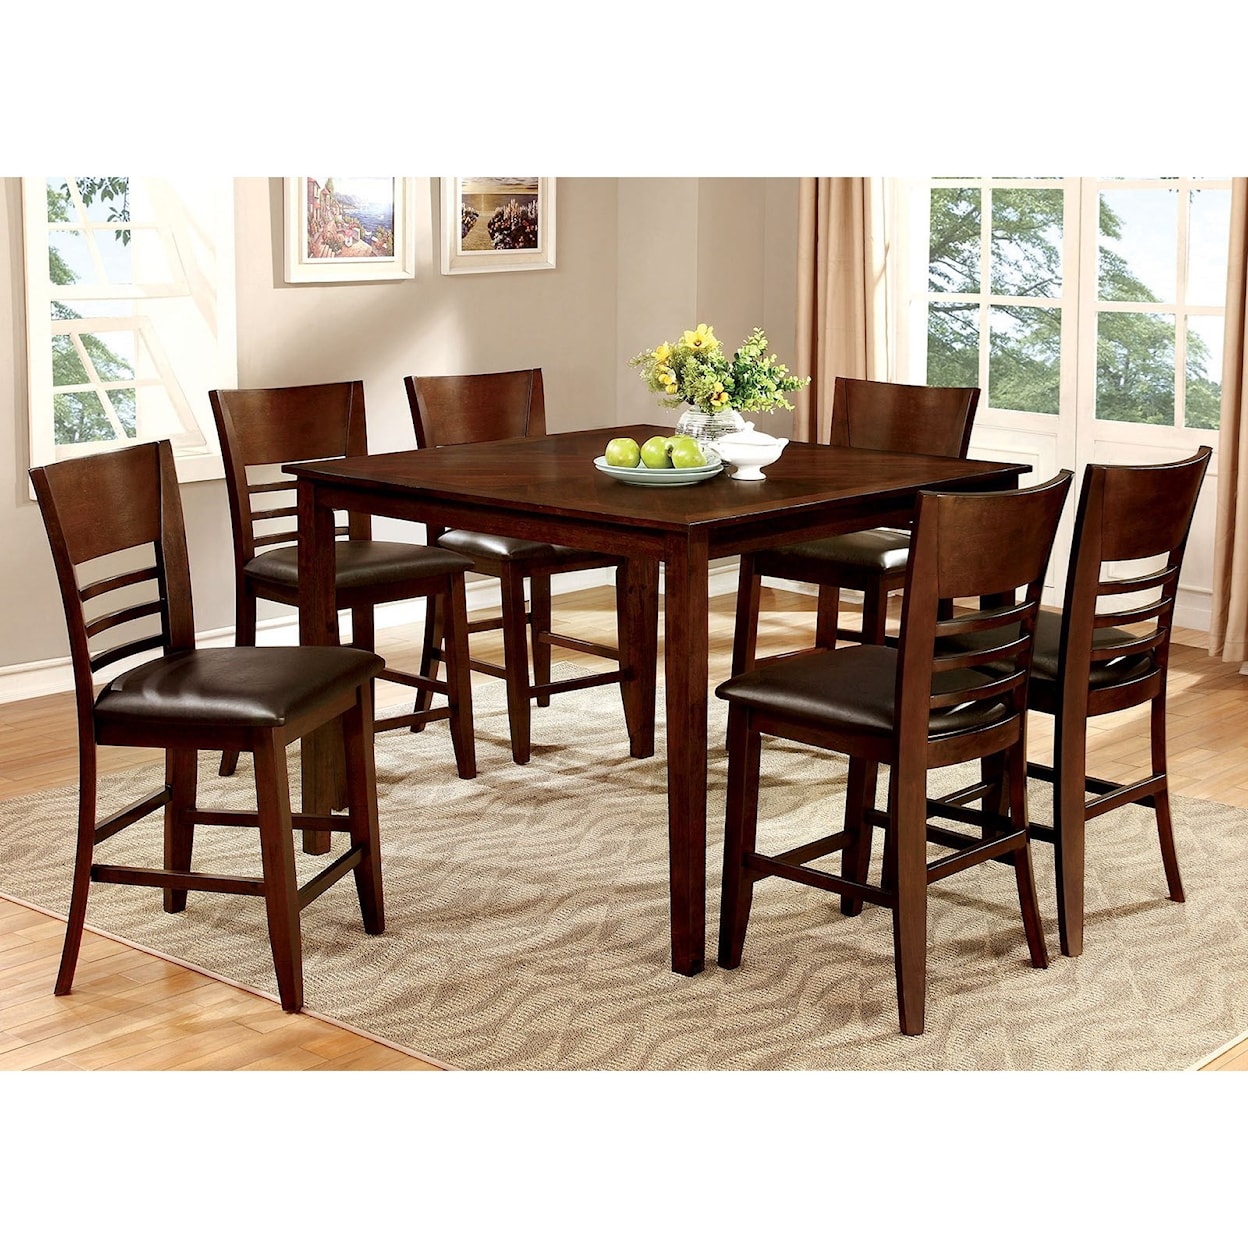 Furniture of America Hillsview Counter Height Dining